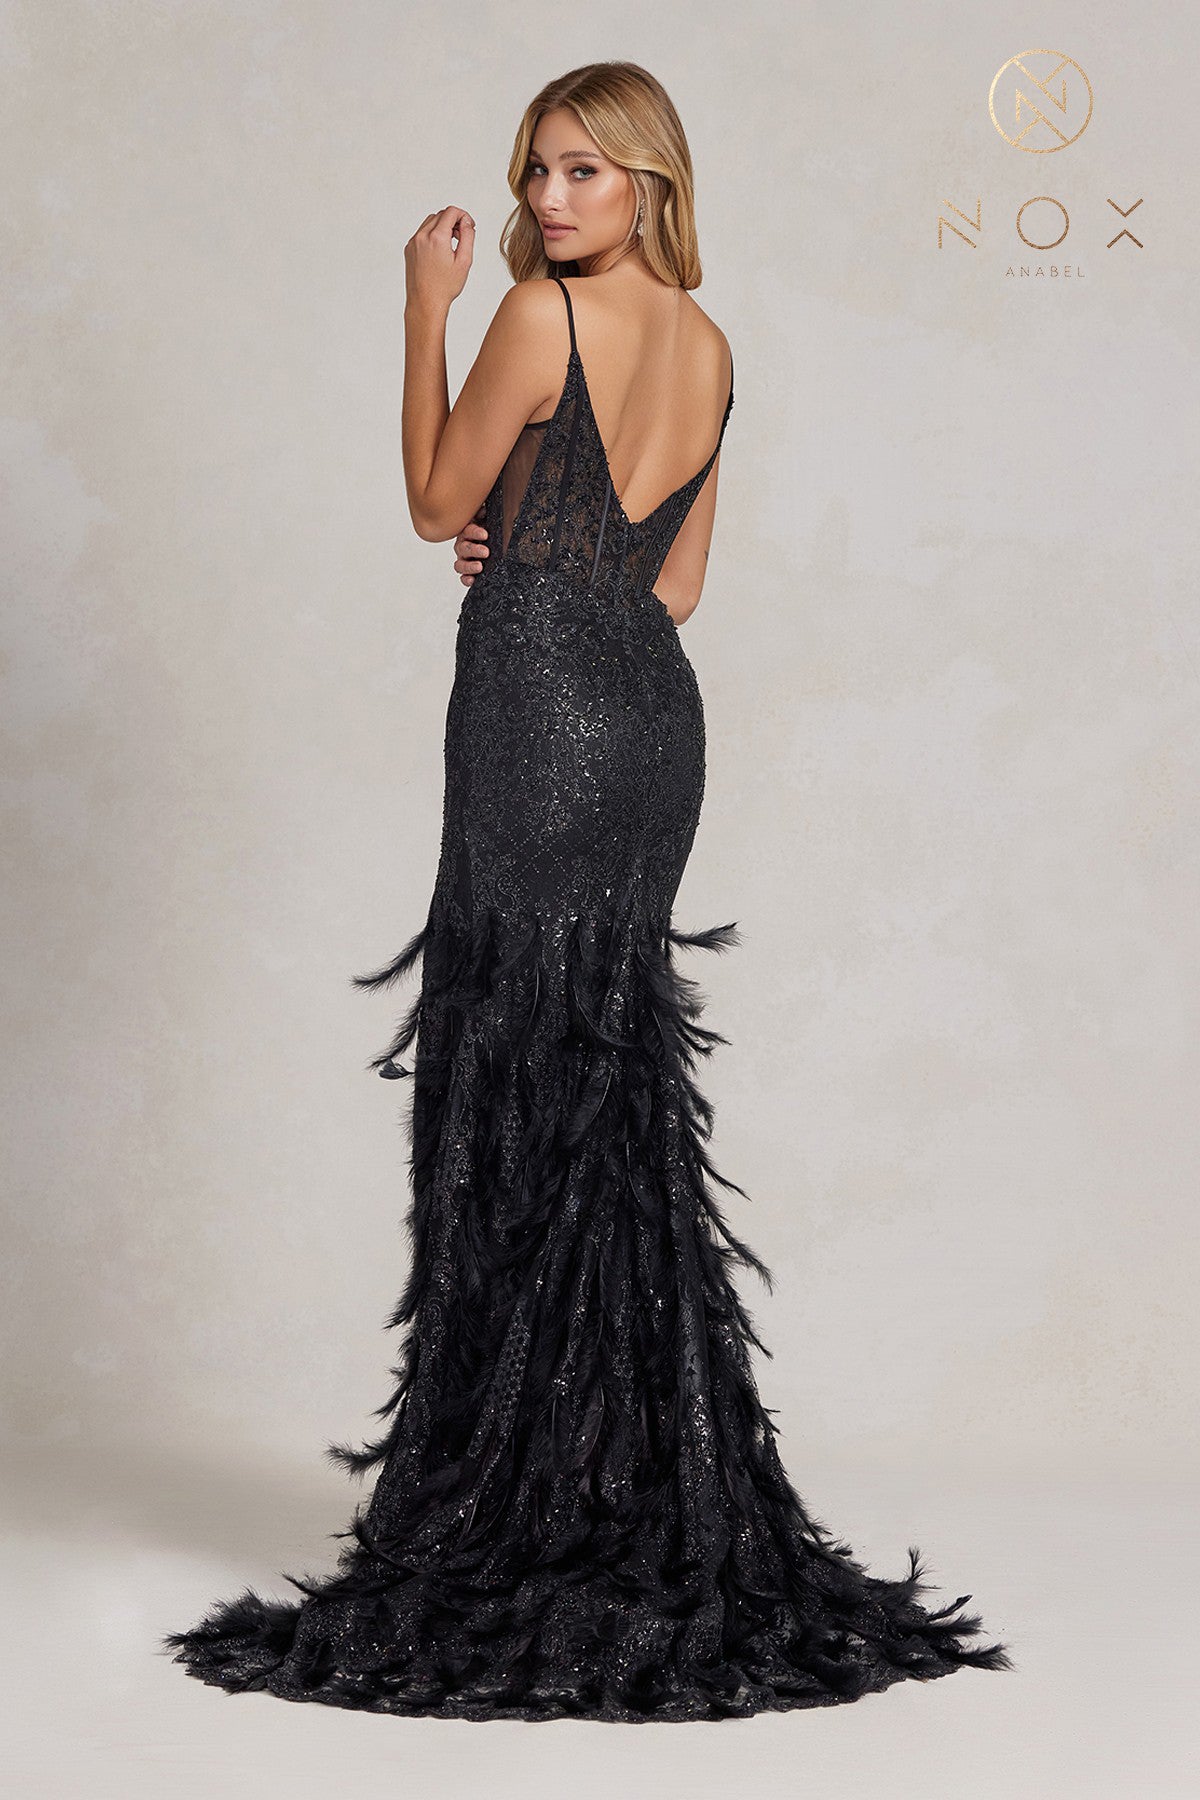 Feather Evening Dress By Nox Anabel -C1119